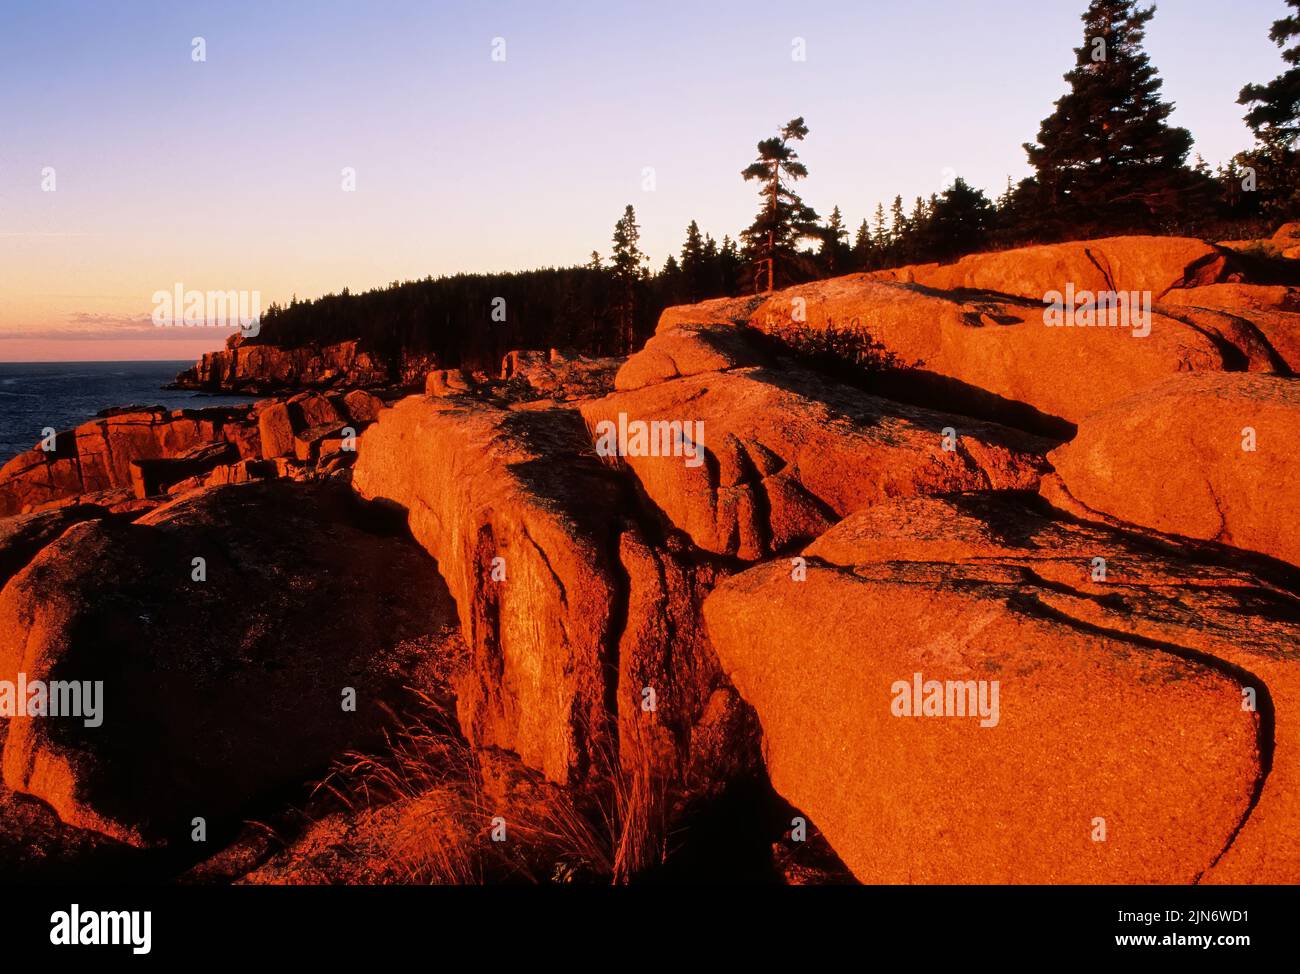 Otter Cliffs dawn scenic at Acadia National Park Stock Photo